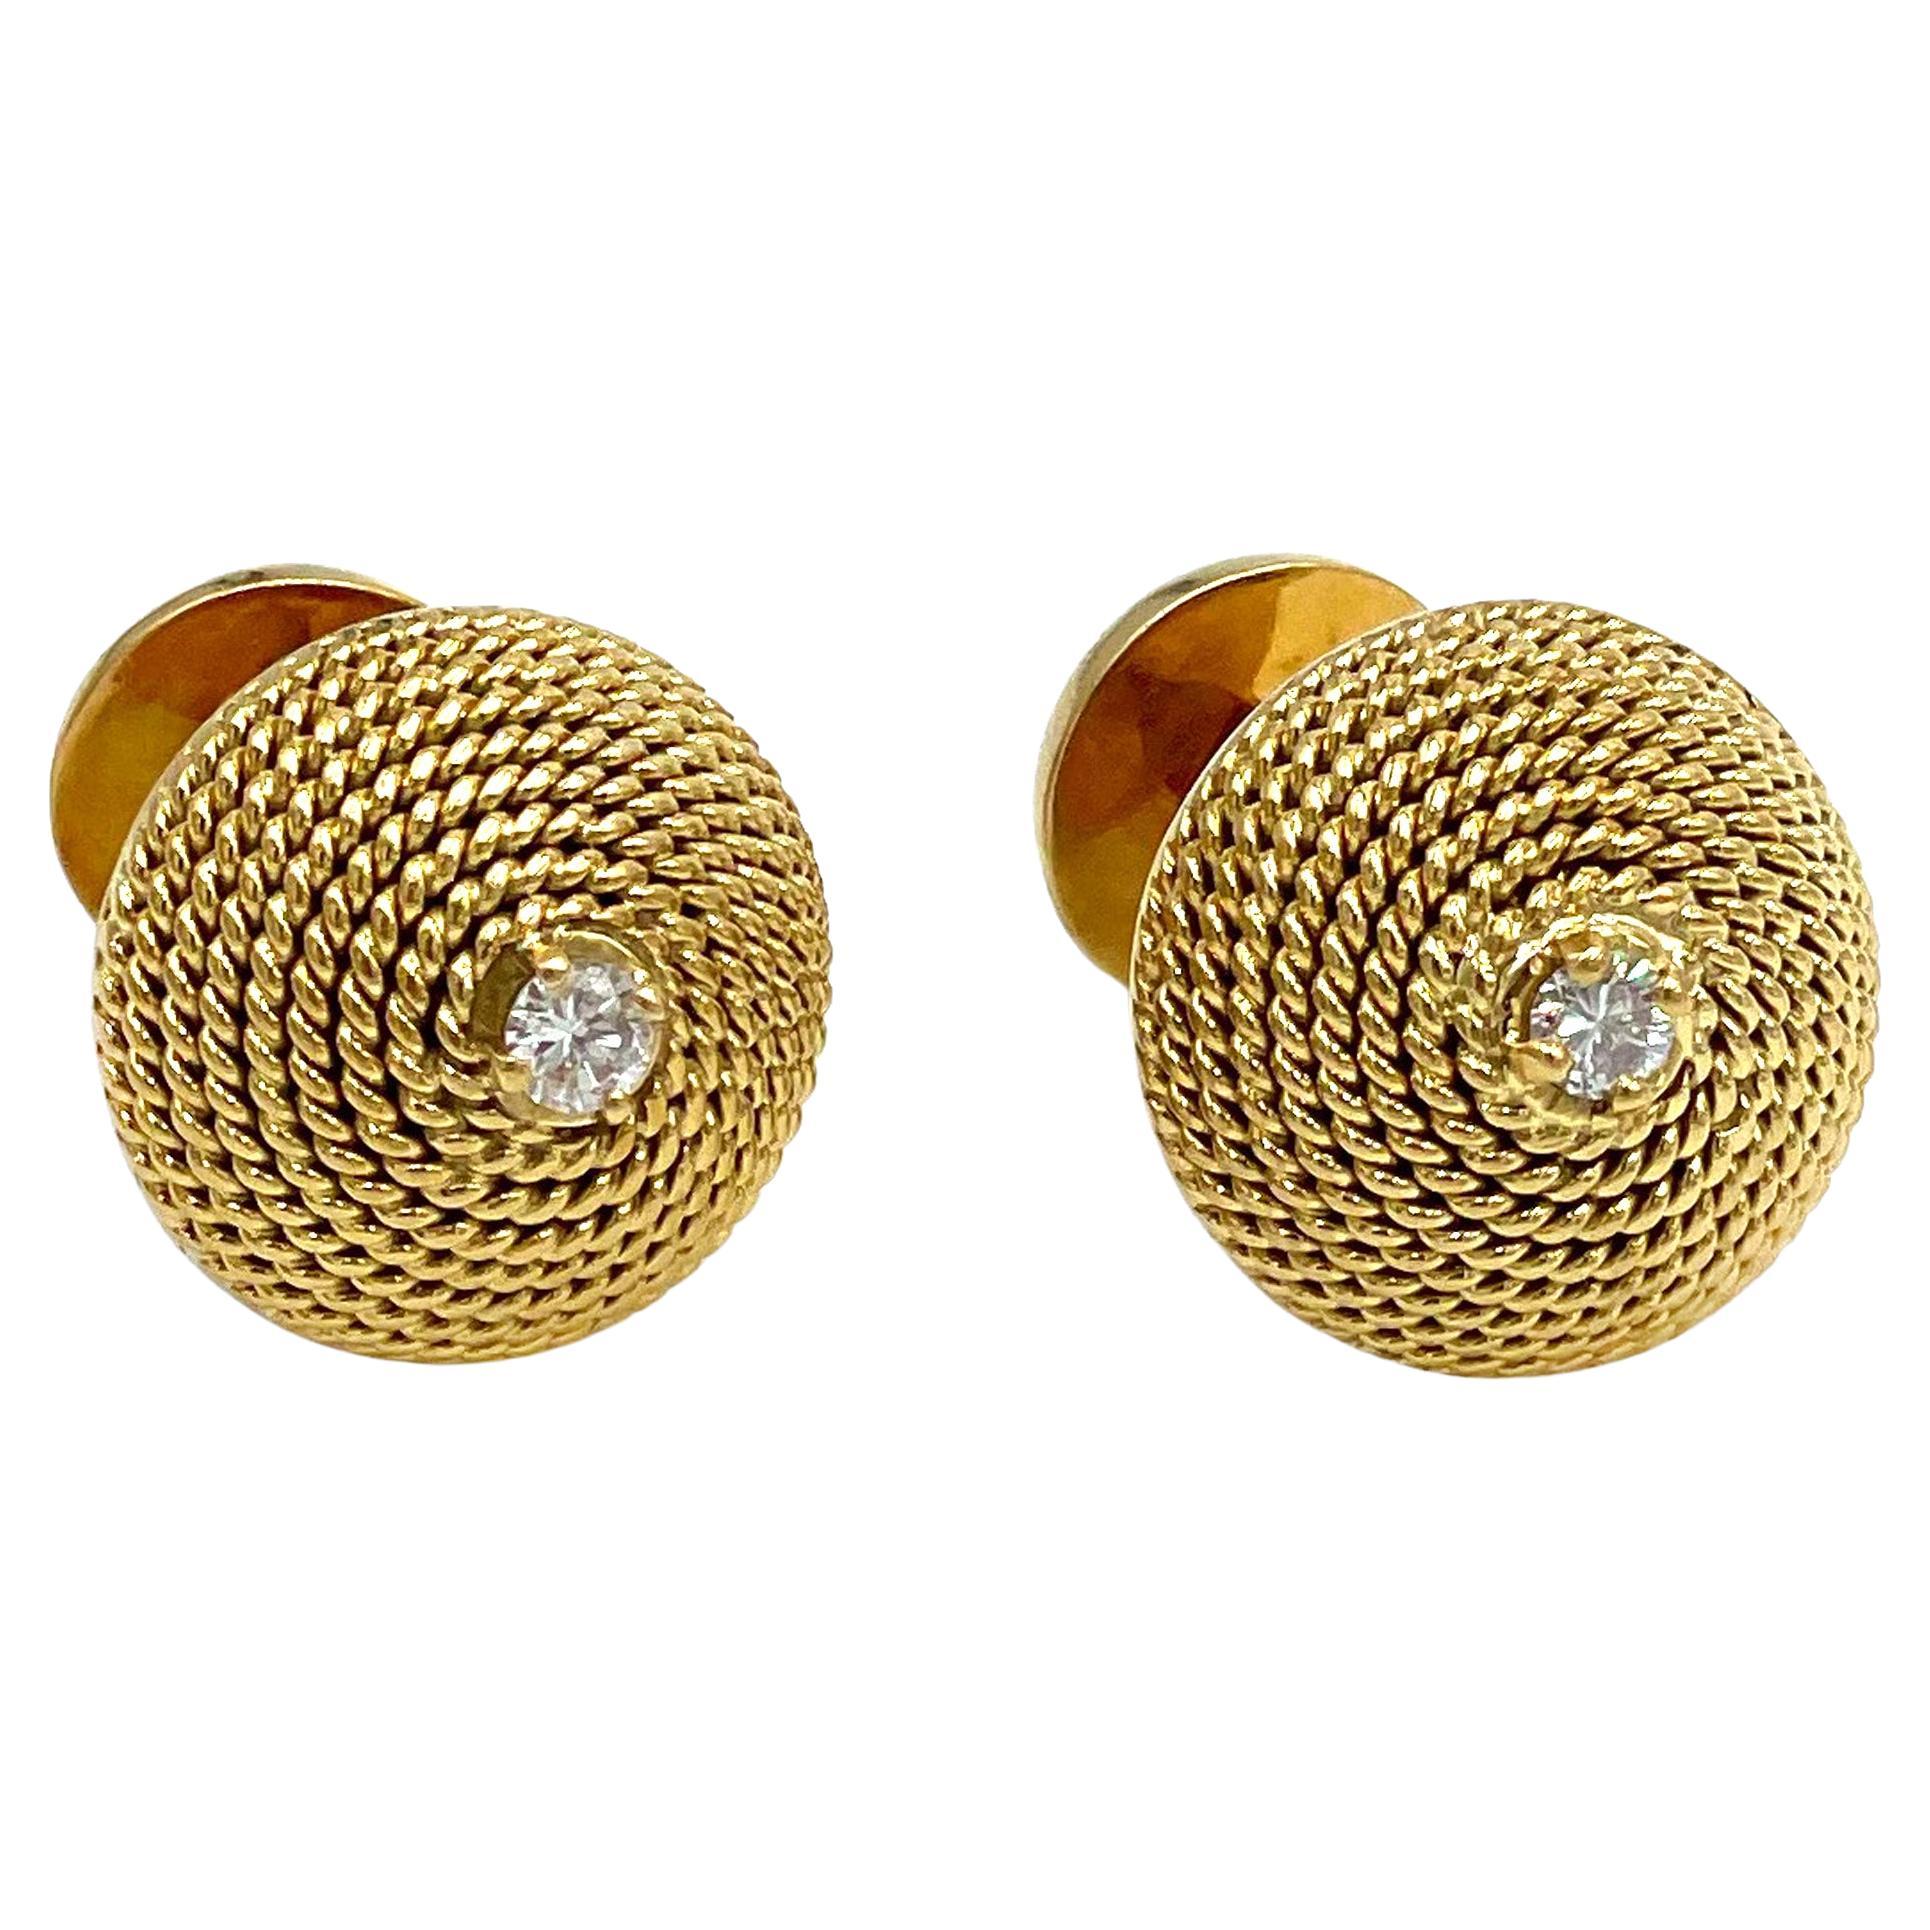 18K Yellow Gold and Diamond Cufflinks with Rope Design and Button Style Backs